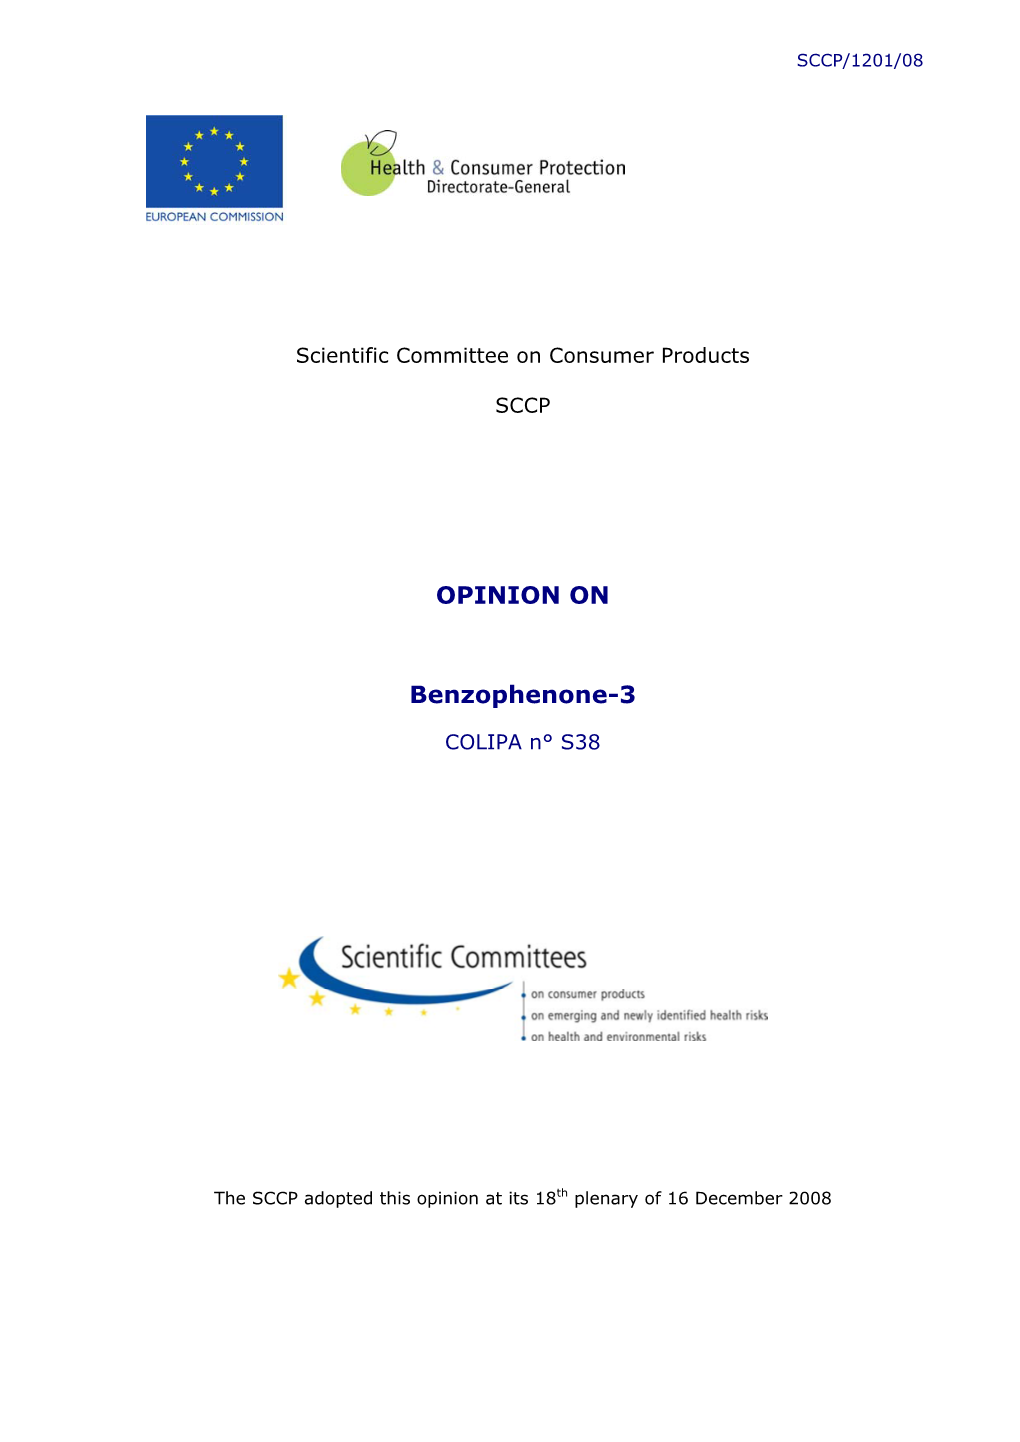 Opinion on Benzophenone-3